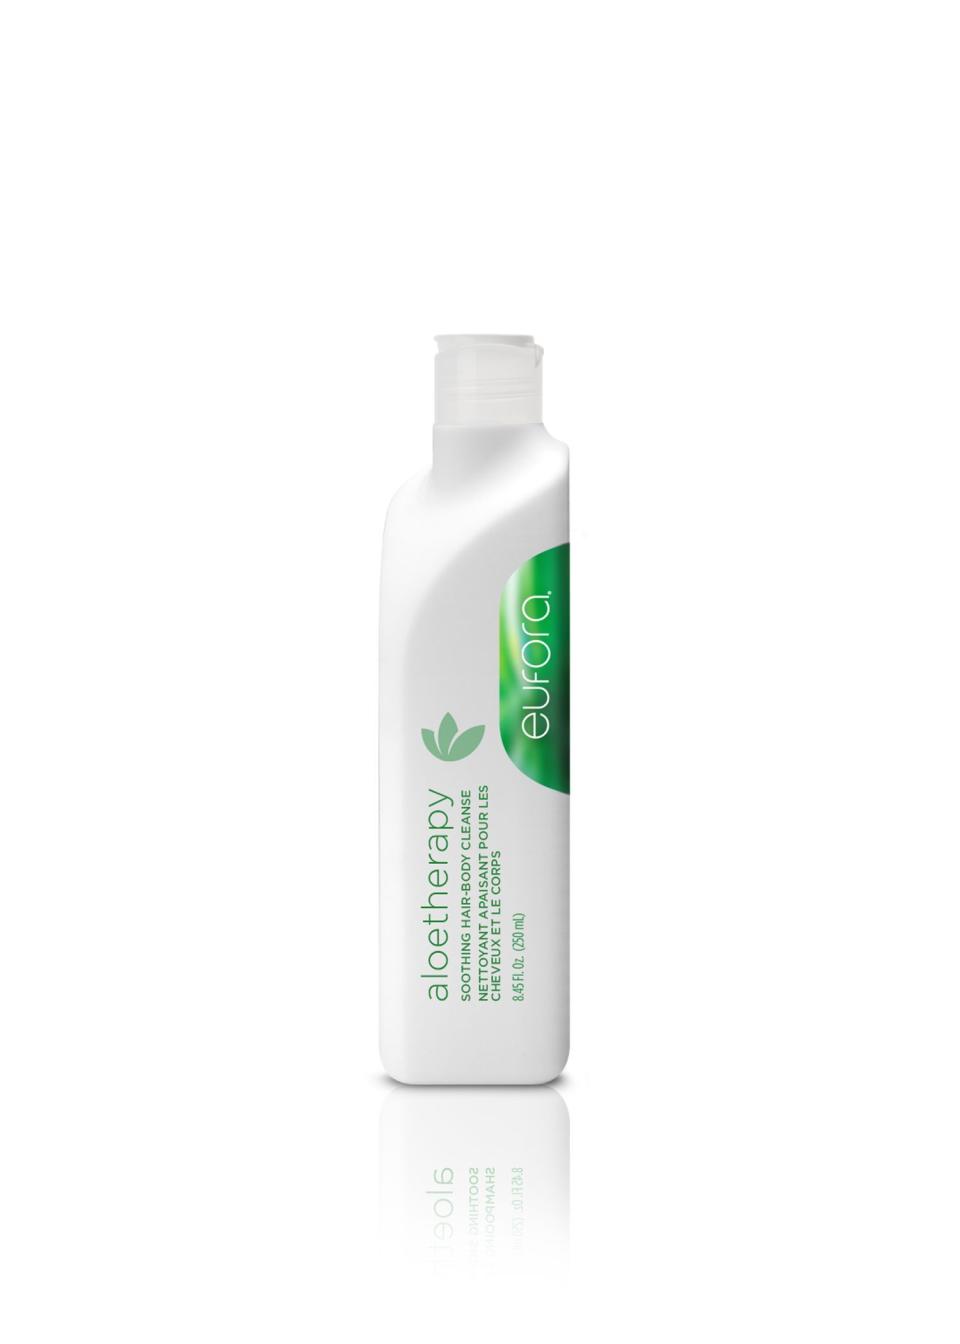 13) Aloe Therapy Soothing Hair-Body Cleanse